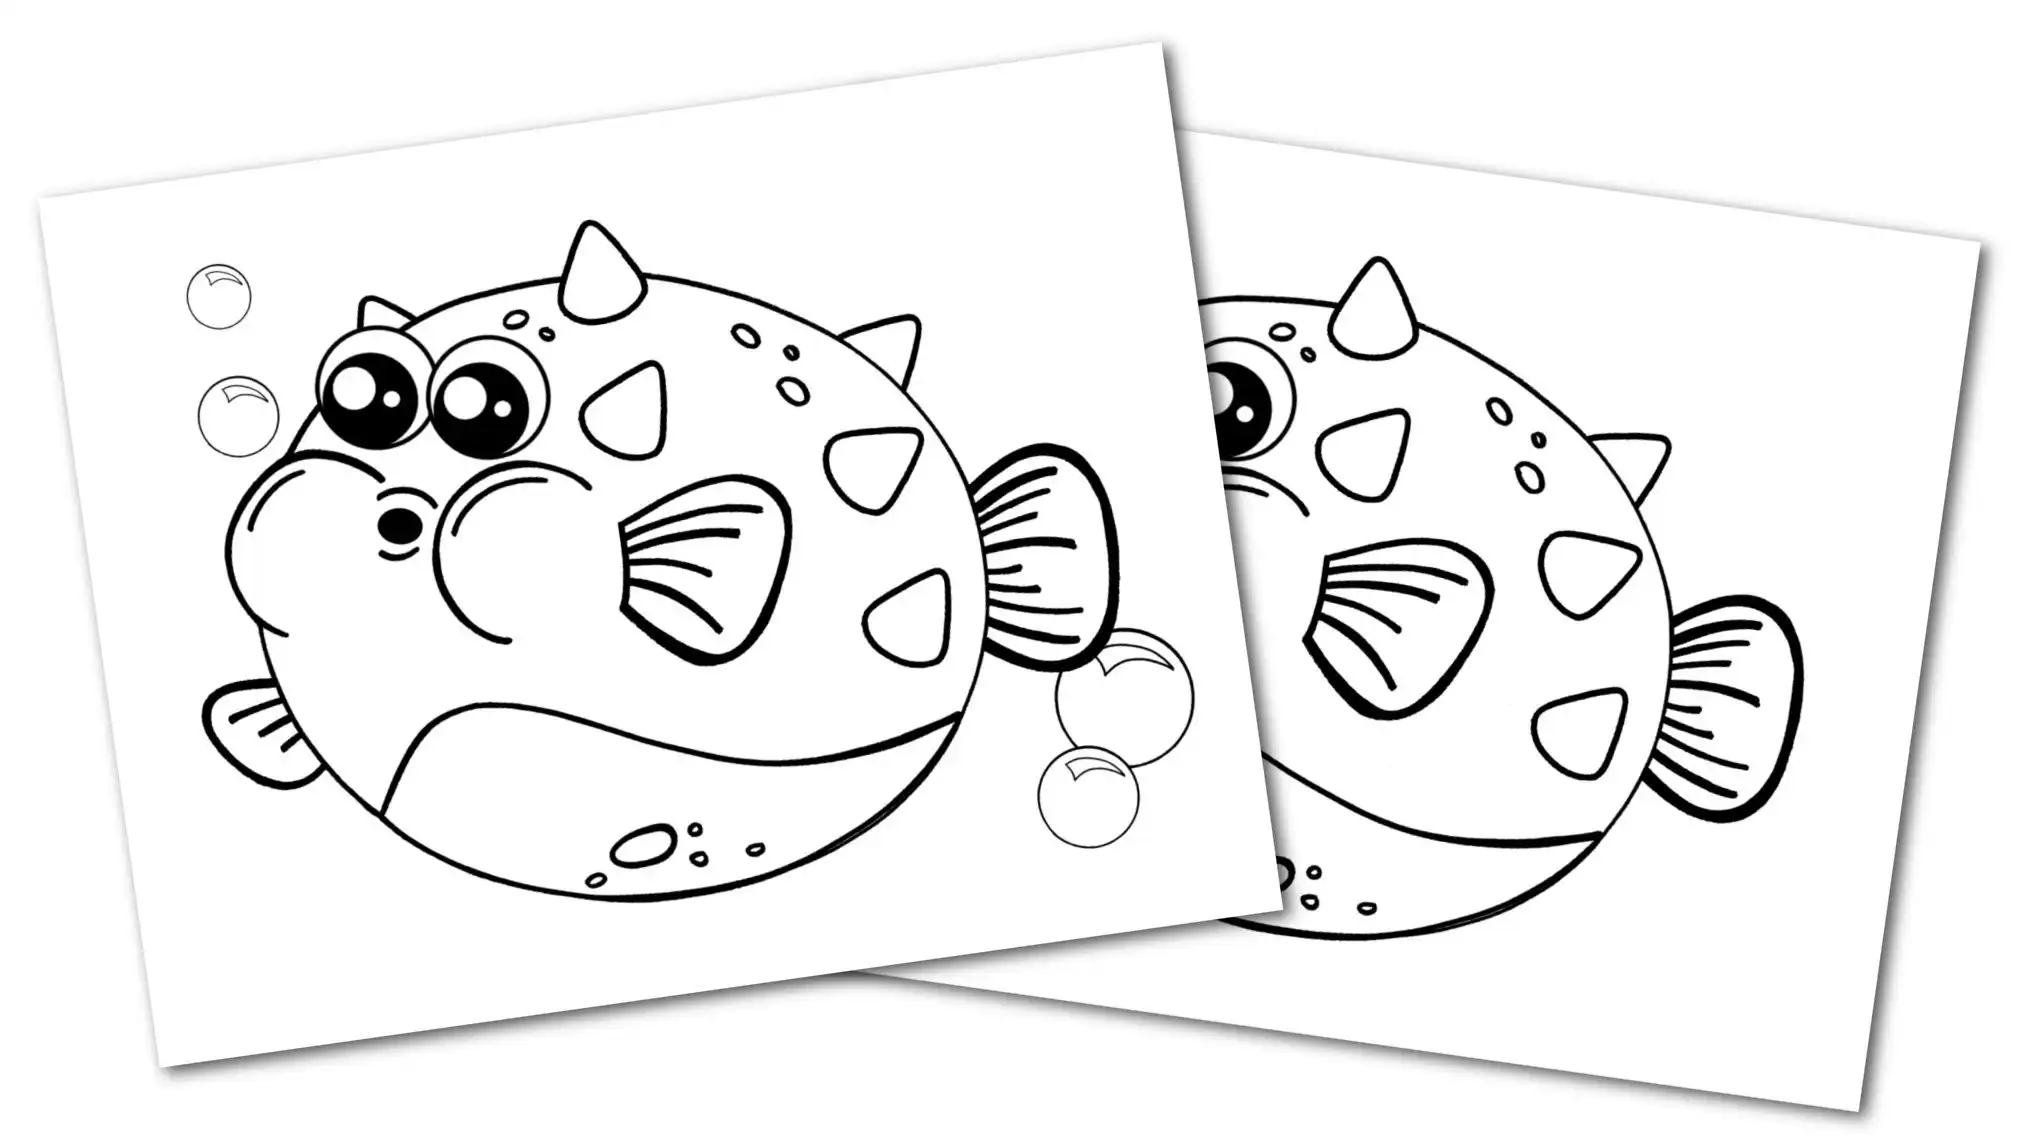 Free printable blowfish coloring page â simple mom project